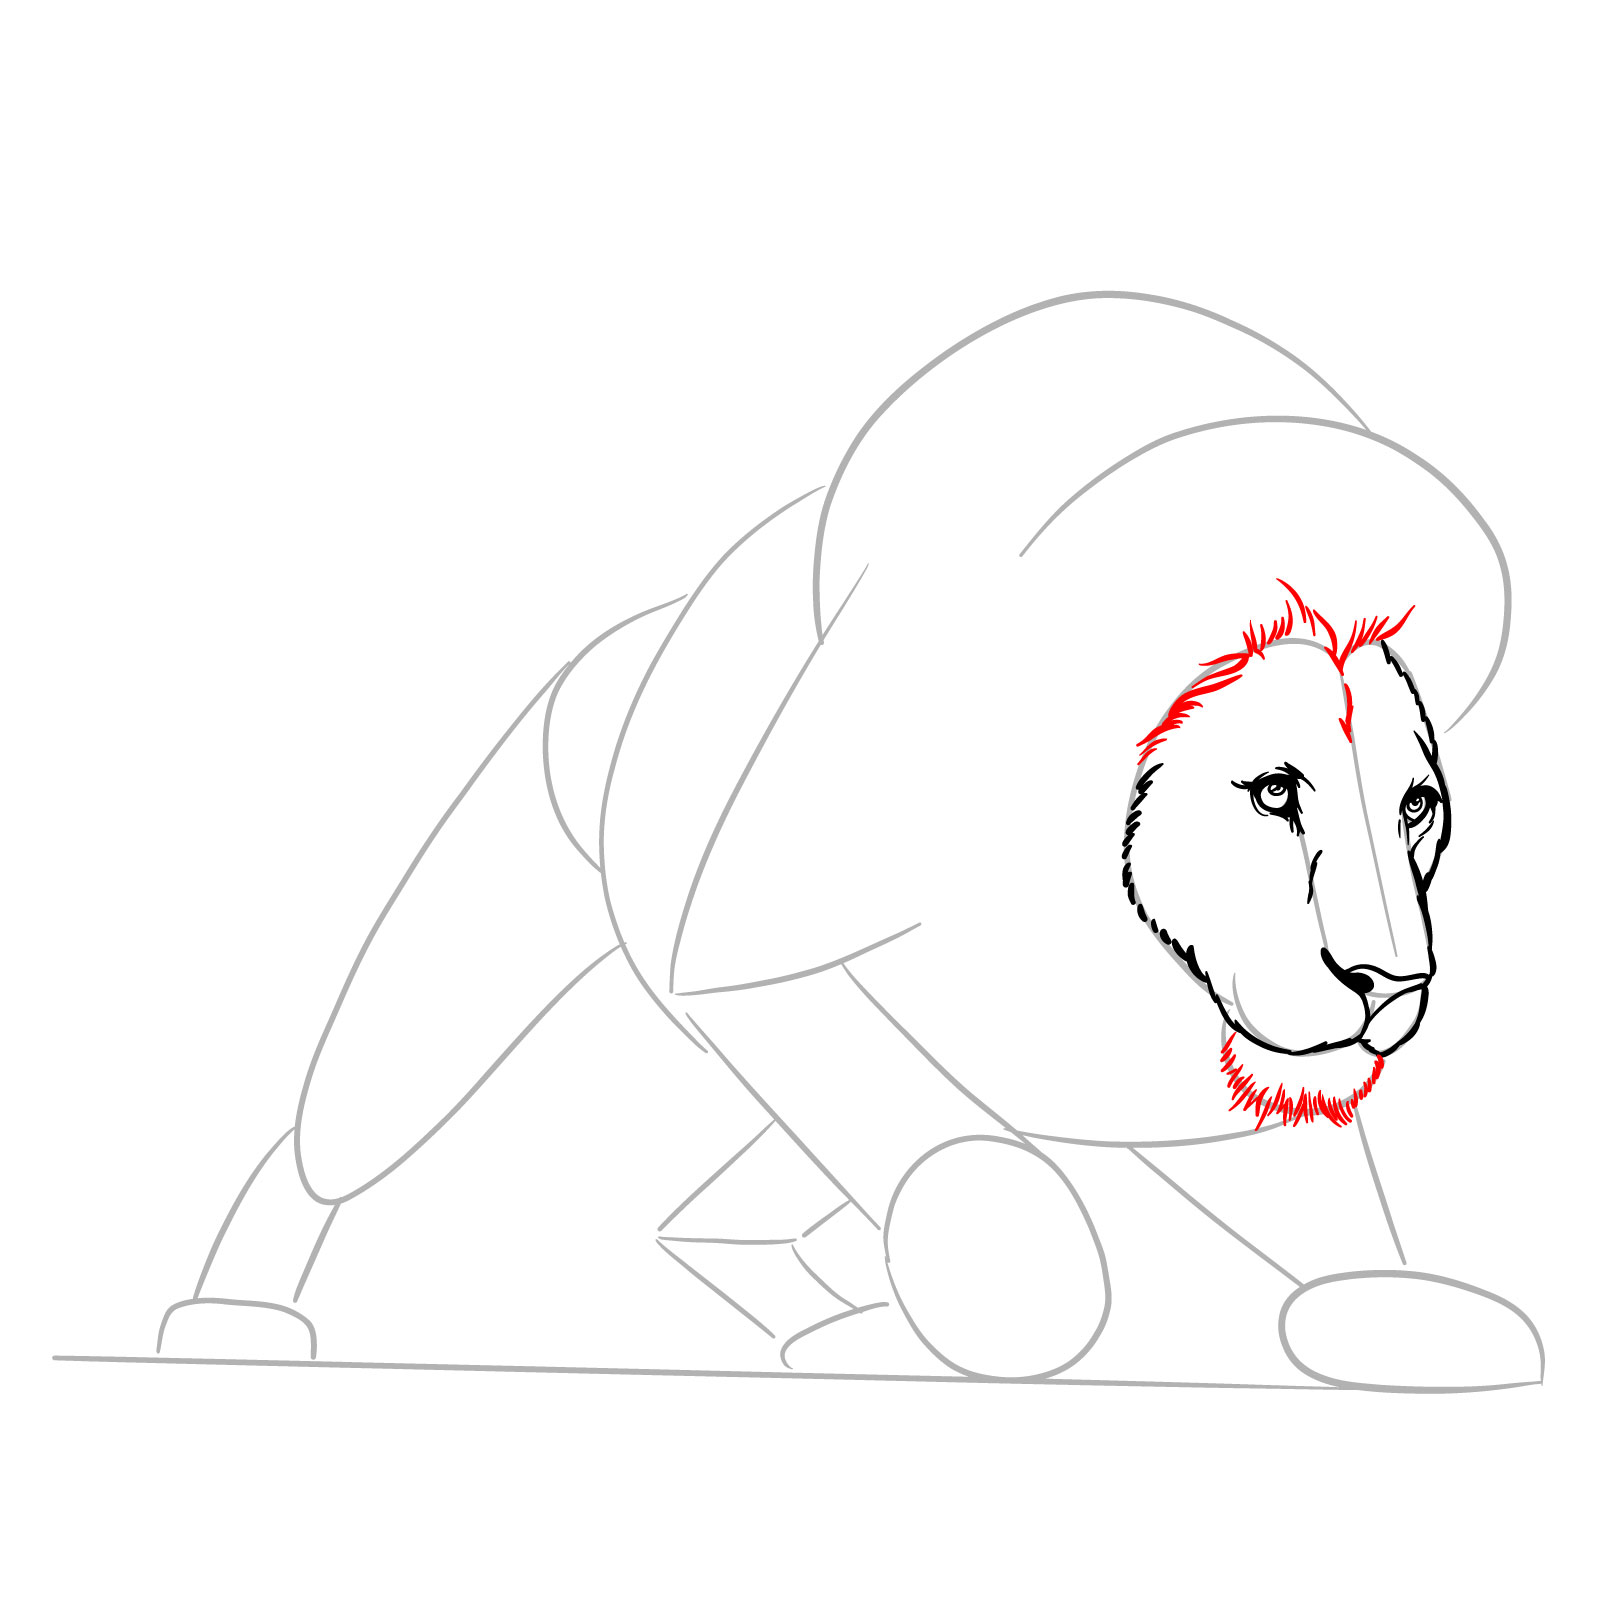 Hunting lion drawing - Step 8: Chin and face fur texturing